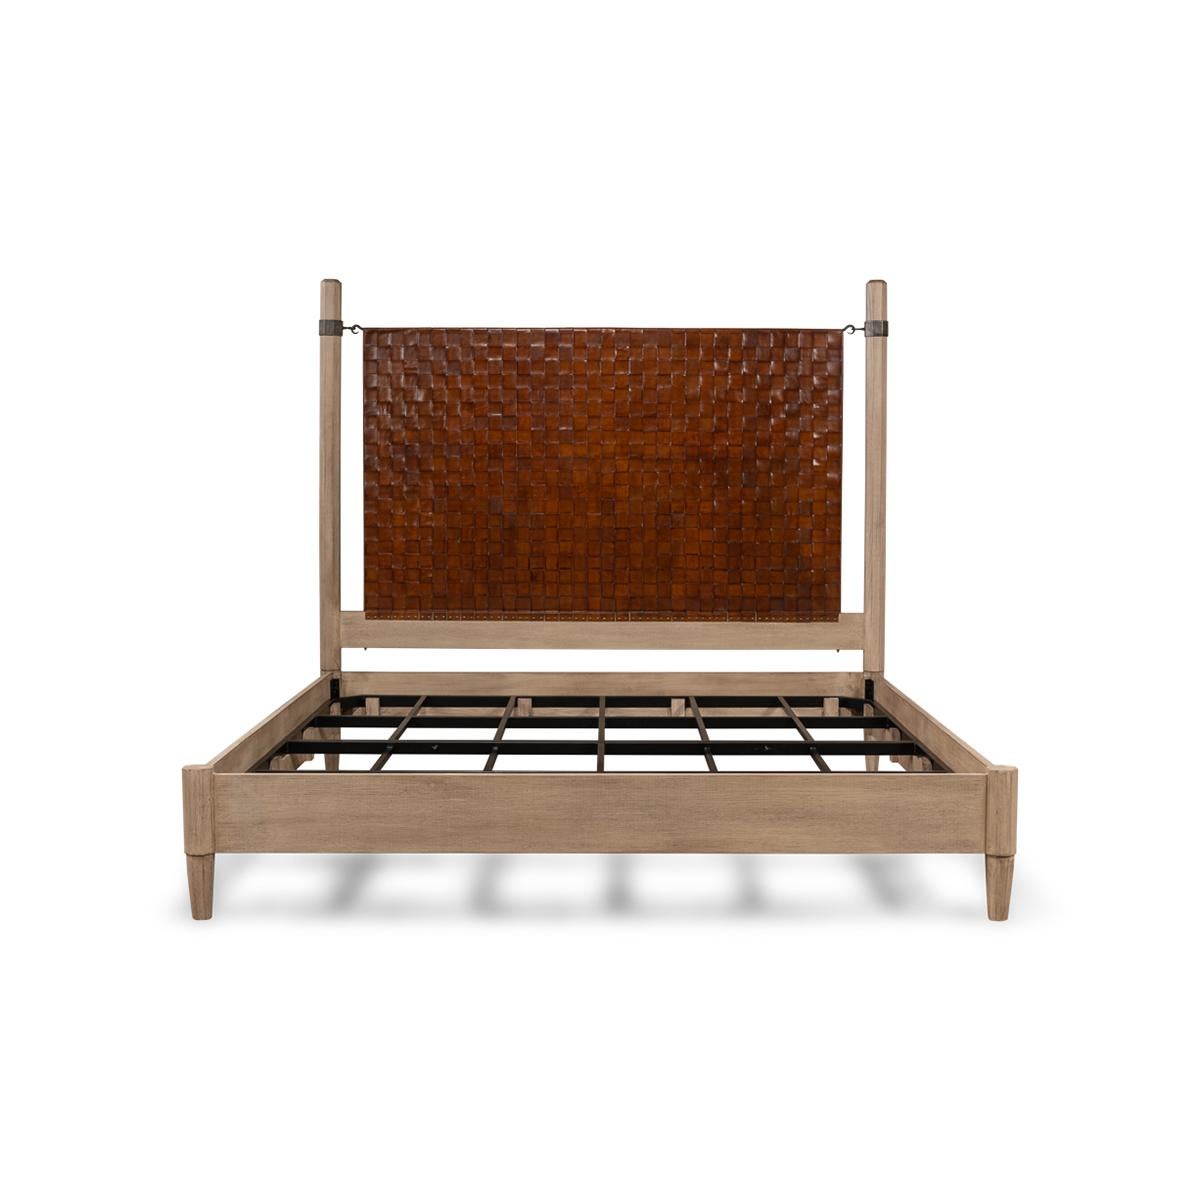 Asian Modern Industrial Bed For Sale